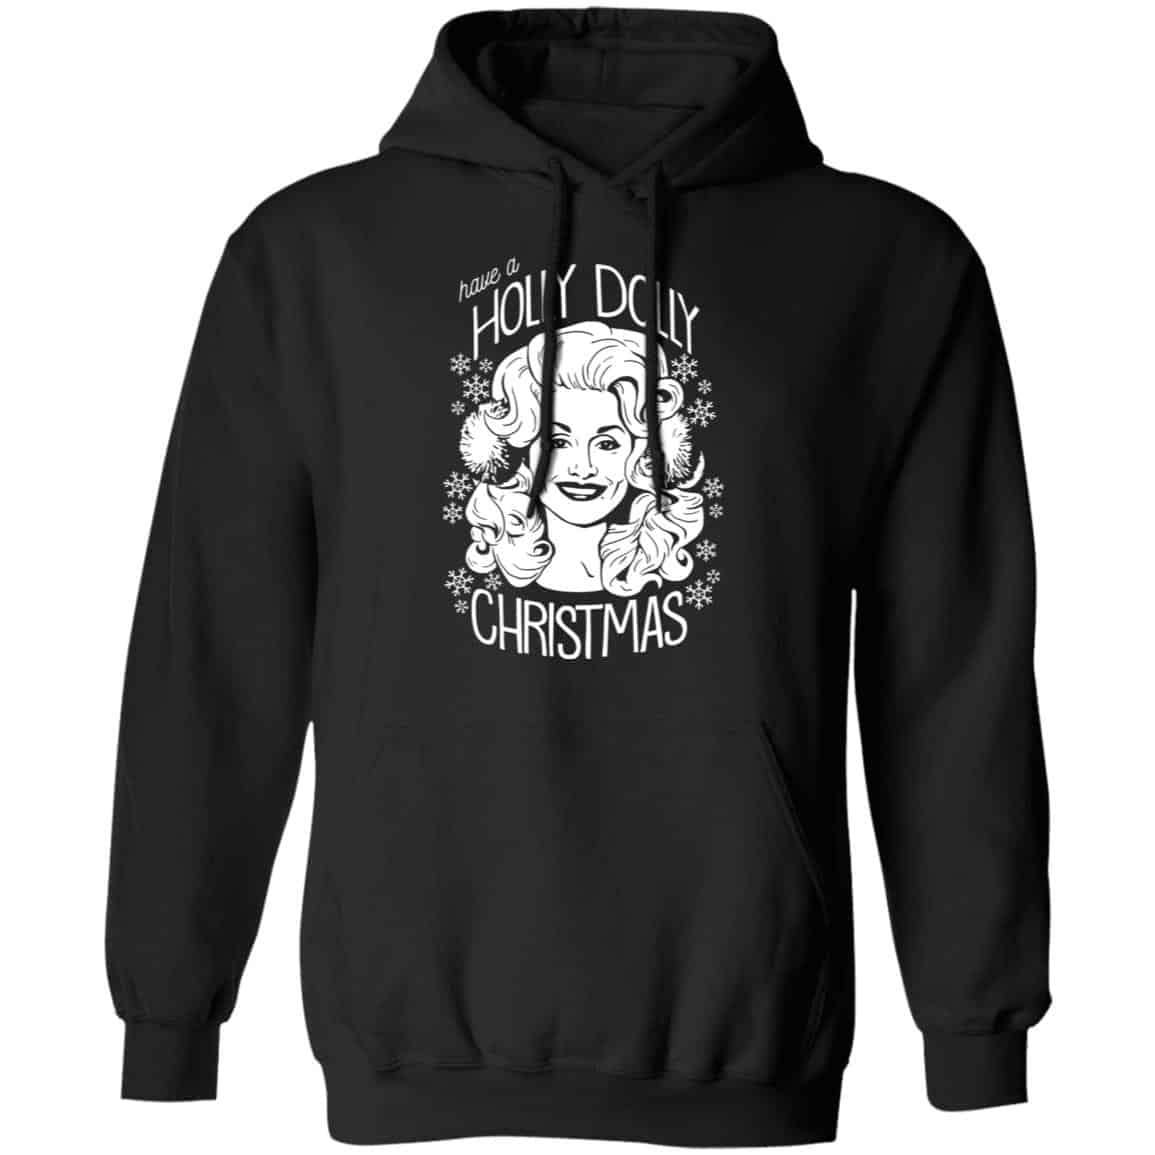 Have A Holly Dolly Christmas Sweatshirt 1